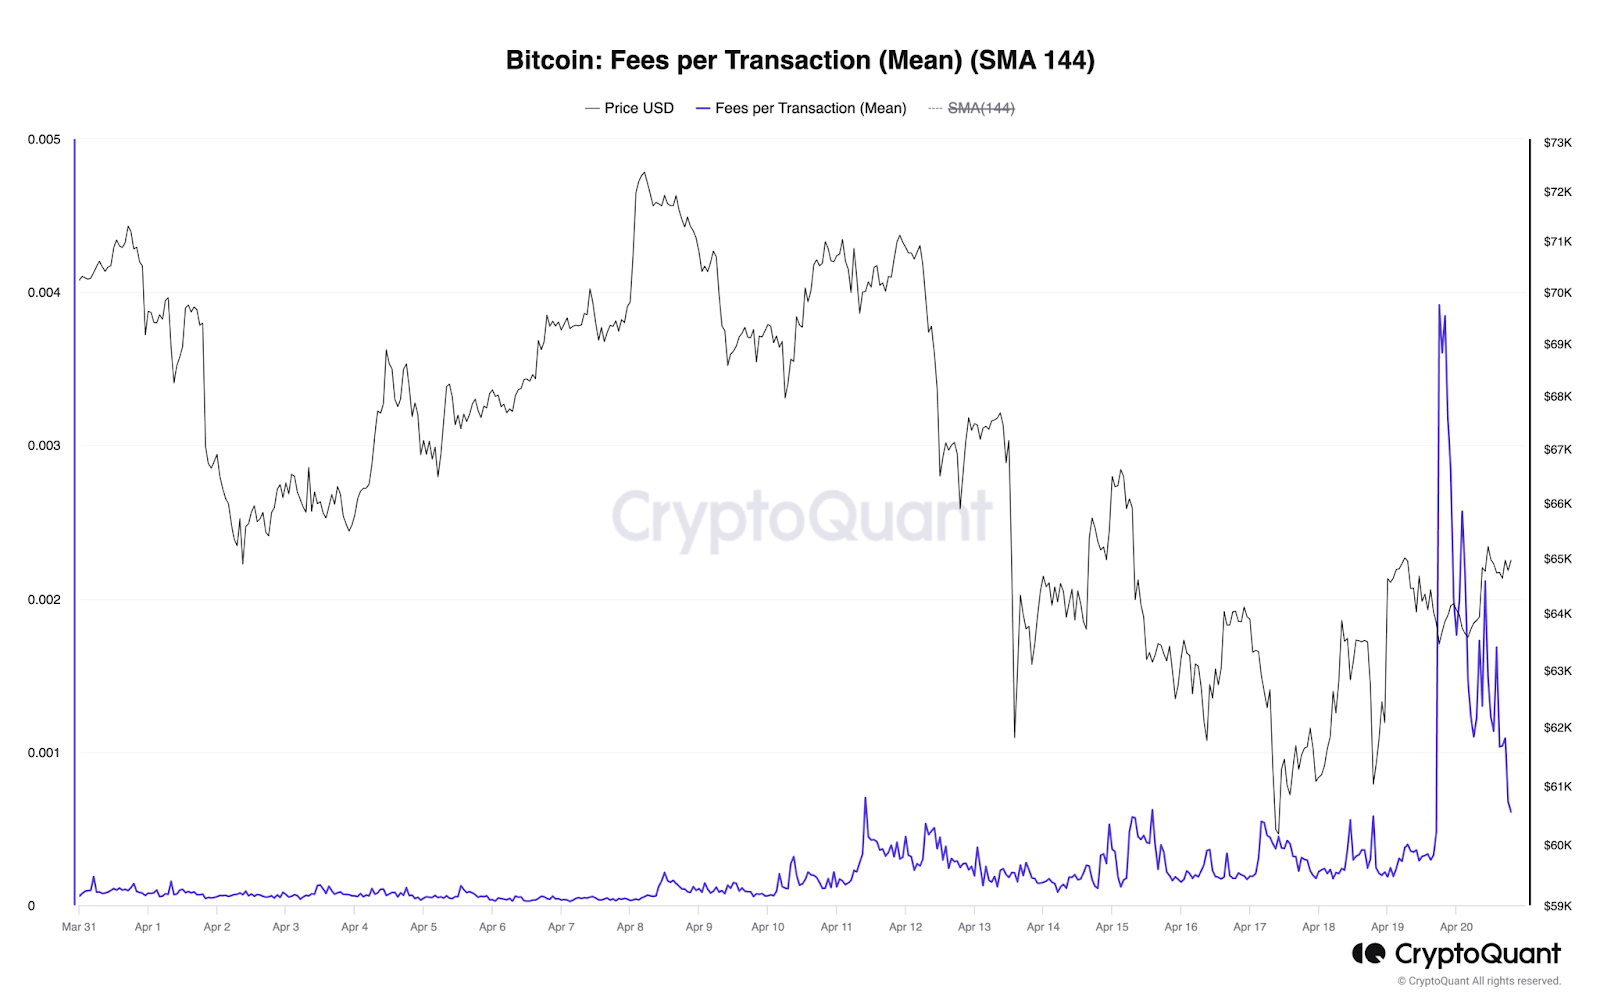 Runes impact fading: Bitcoin transaction fees plummet to 5-Year Low